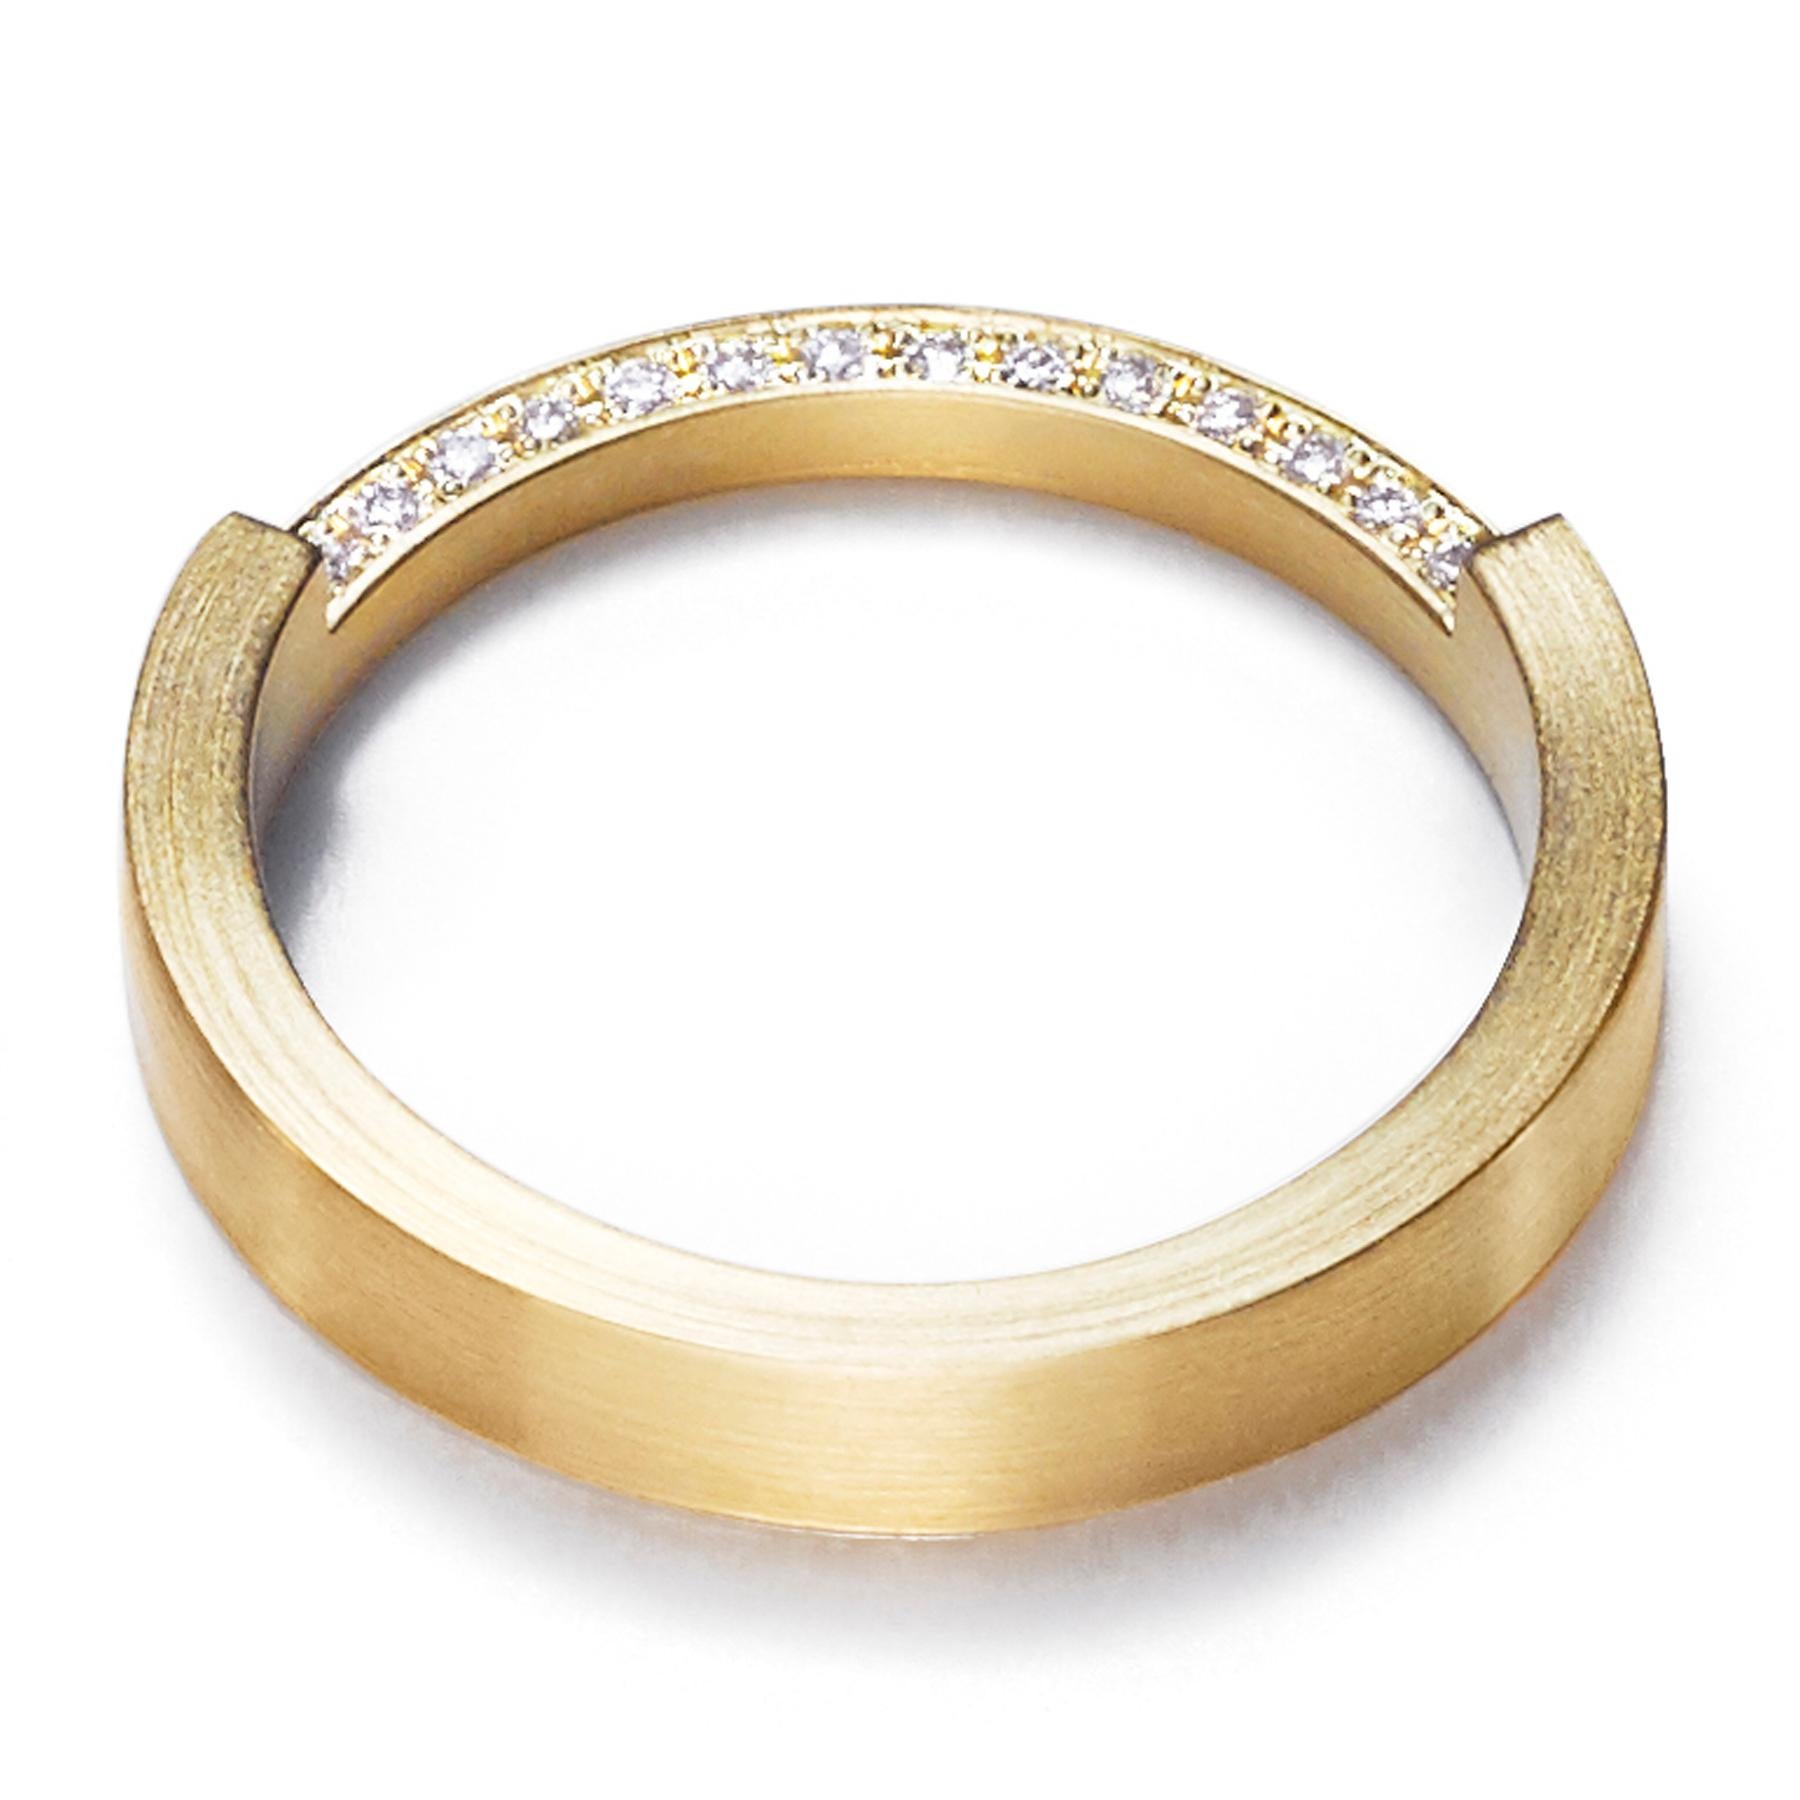 The 'Assemble 02' ring has a square edge band with a third of the band narrowed in half and filled with diamonds. Ideal for stacking* with other rings from the 'Assemble' range.

Diamond: 1mm (amount varies depending on ring size)
Band width: 3.6mm,